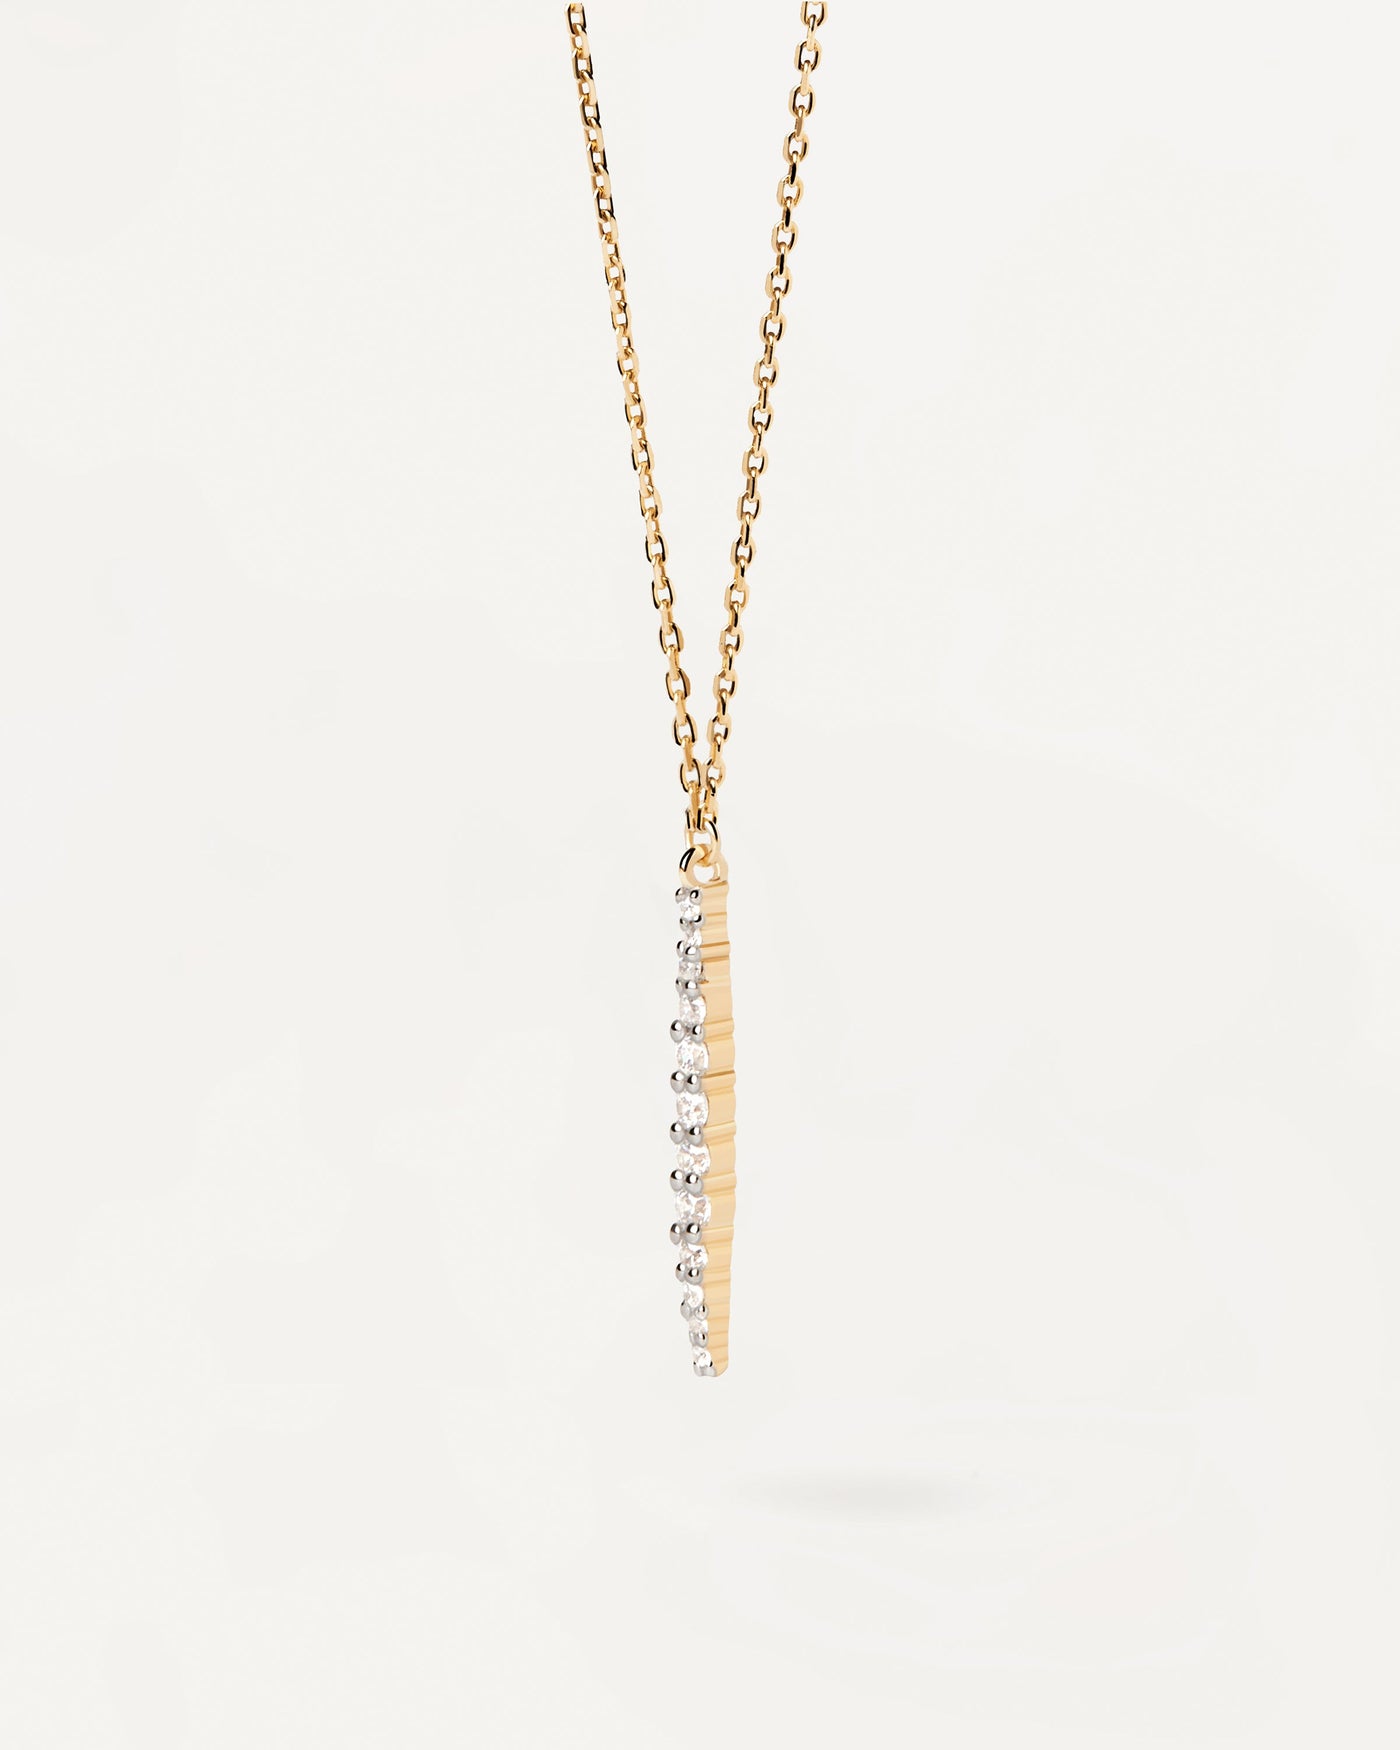 2023 Selection | Diamonds And Gold Kate Necklace. Solid yellow gold necklace with a 12-pavé diamond pendant of 0.17 carats. Get the latest arrival from PDPAOLA. Place your order safely and get this Best Seller. Free Shipping.